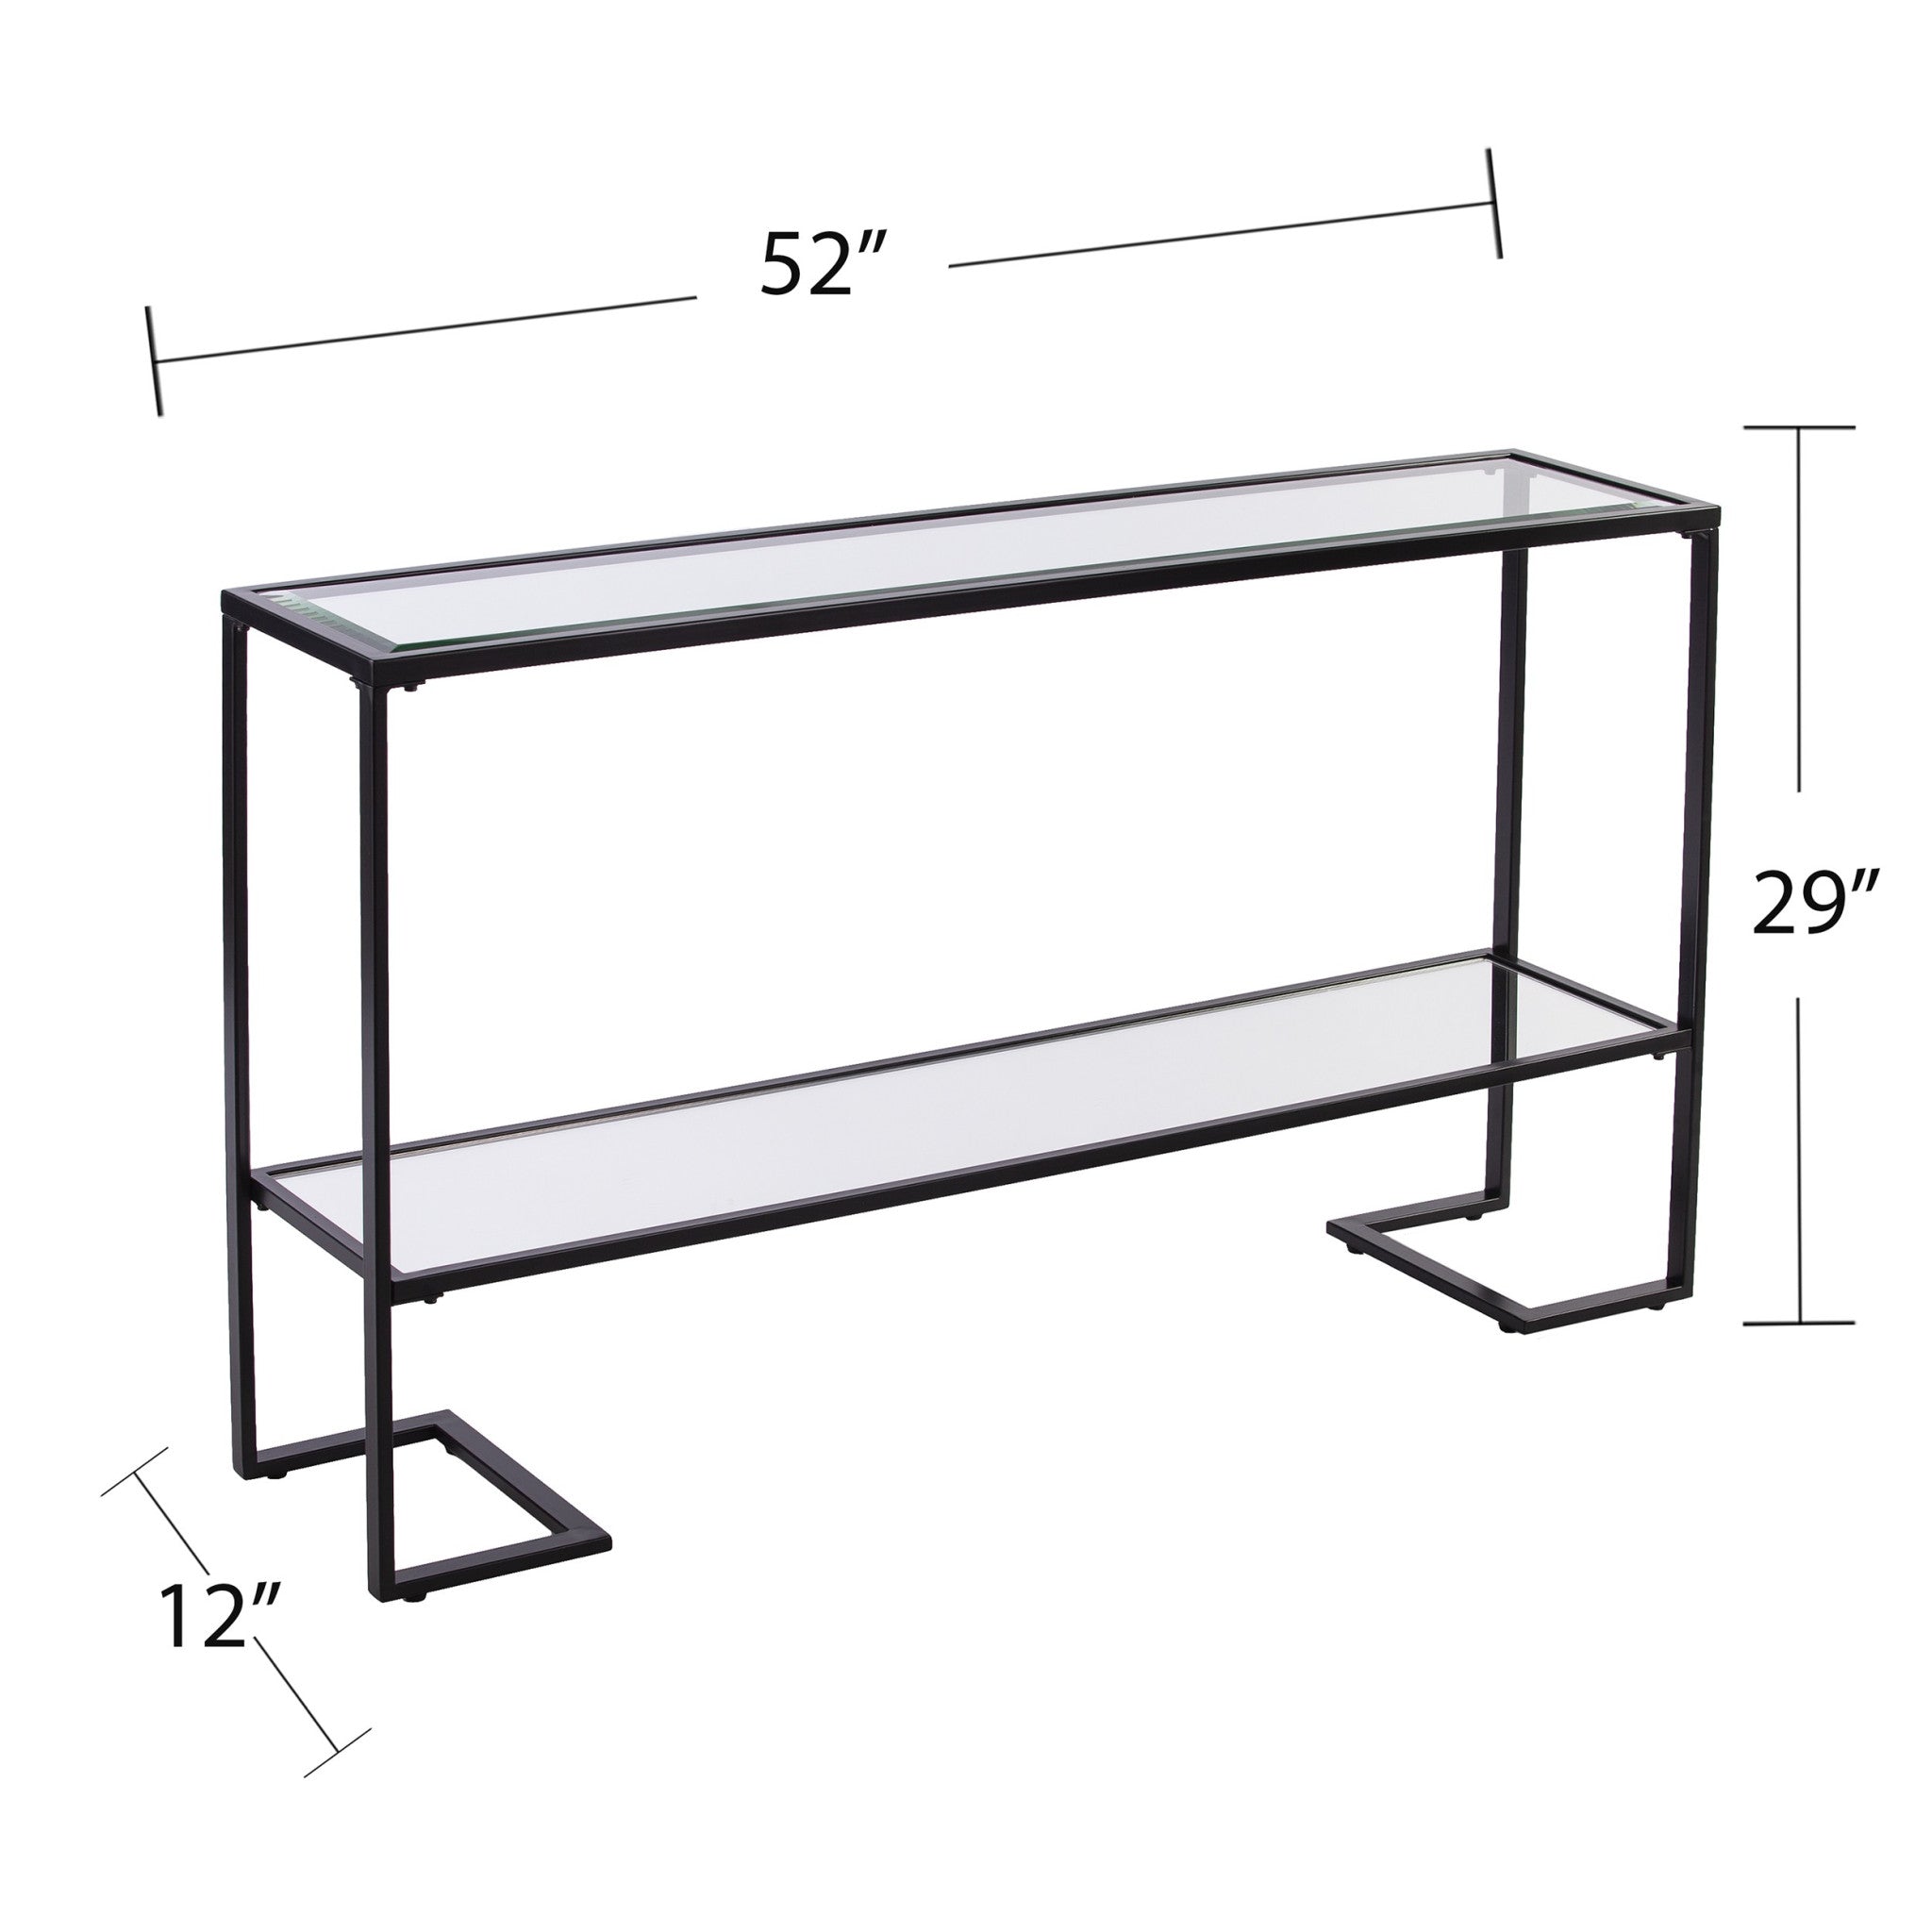 52" Clear and Black Glass Mirrored Frame Console Table With Storage